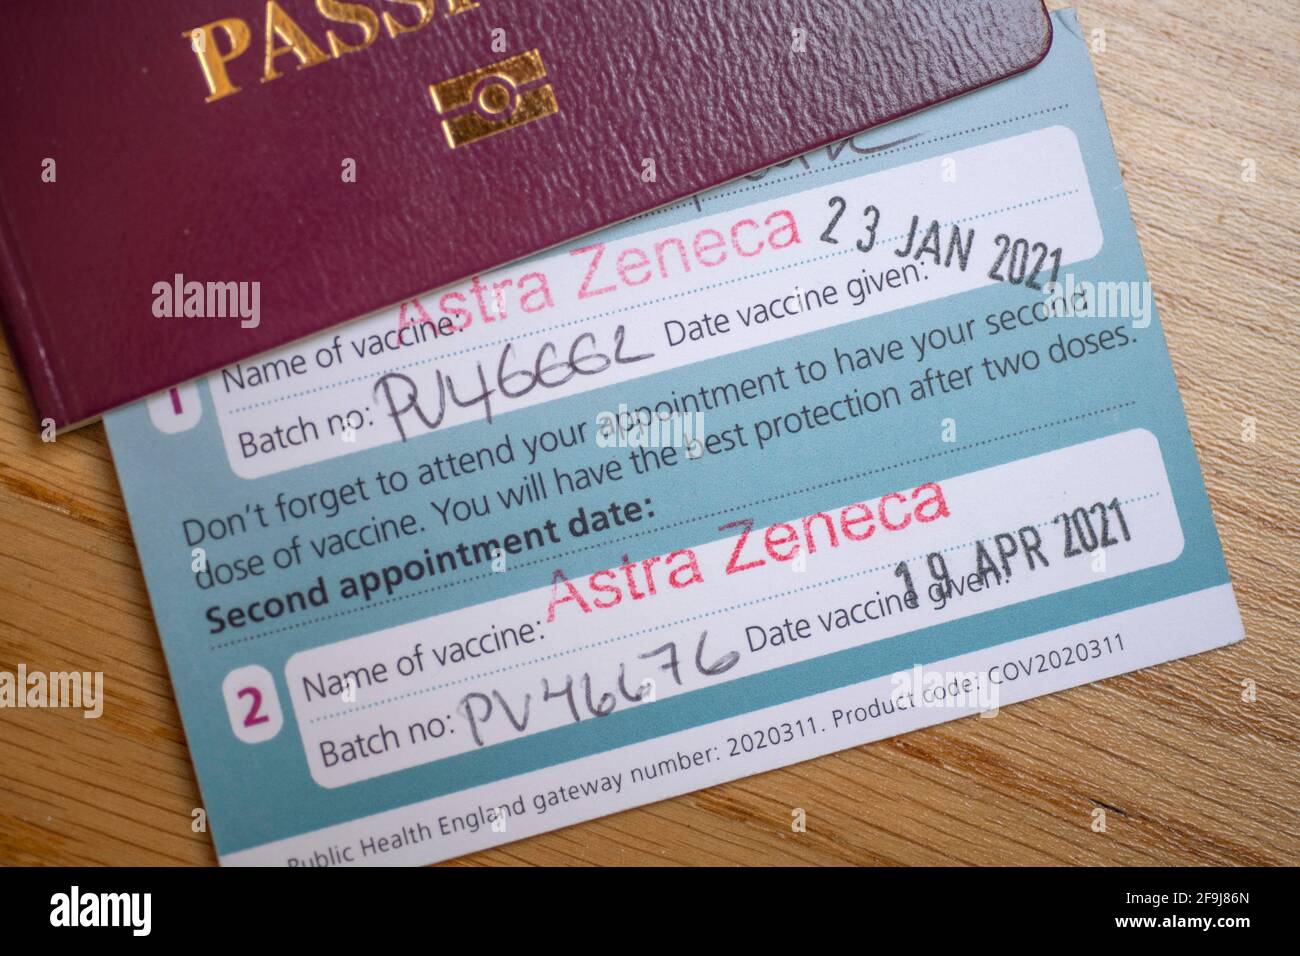 London, UK. 19 April 2021. Vaccine certificate issued by NHS UK with second Astra Zeneca vaccination stamped, certificate tucked inside UK passport. Credit: Malcolm Park/Alamy Live News. Stock Photo